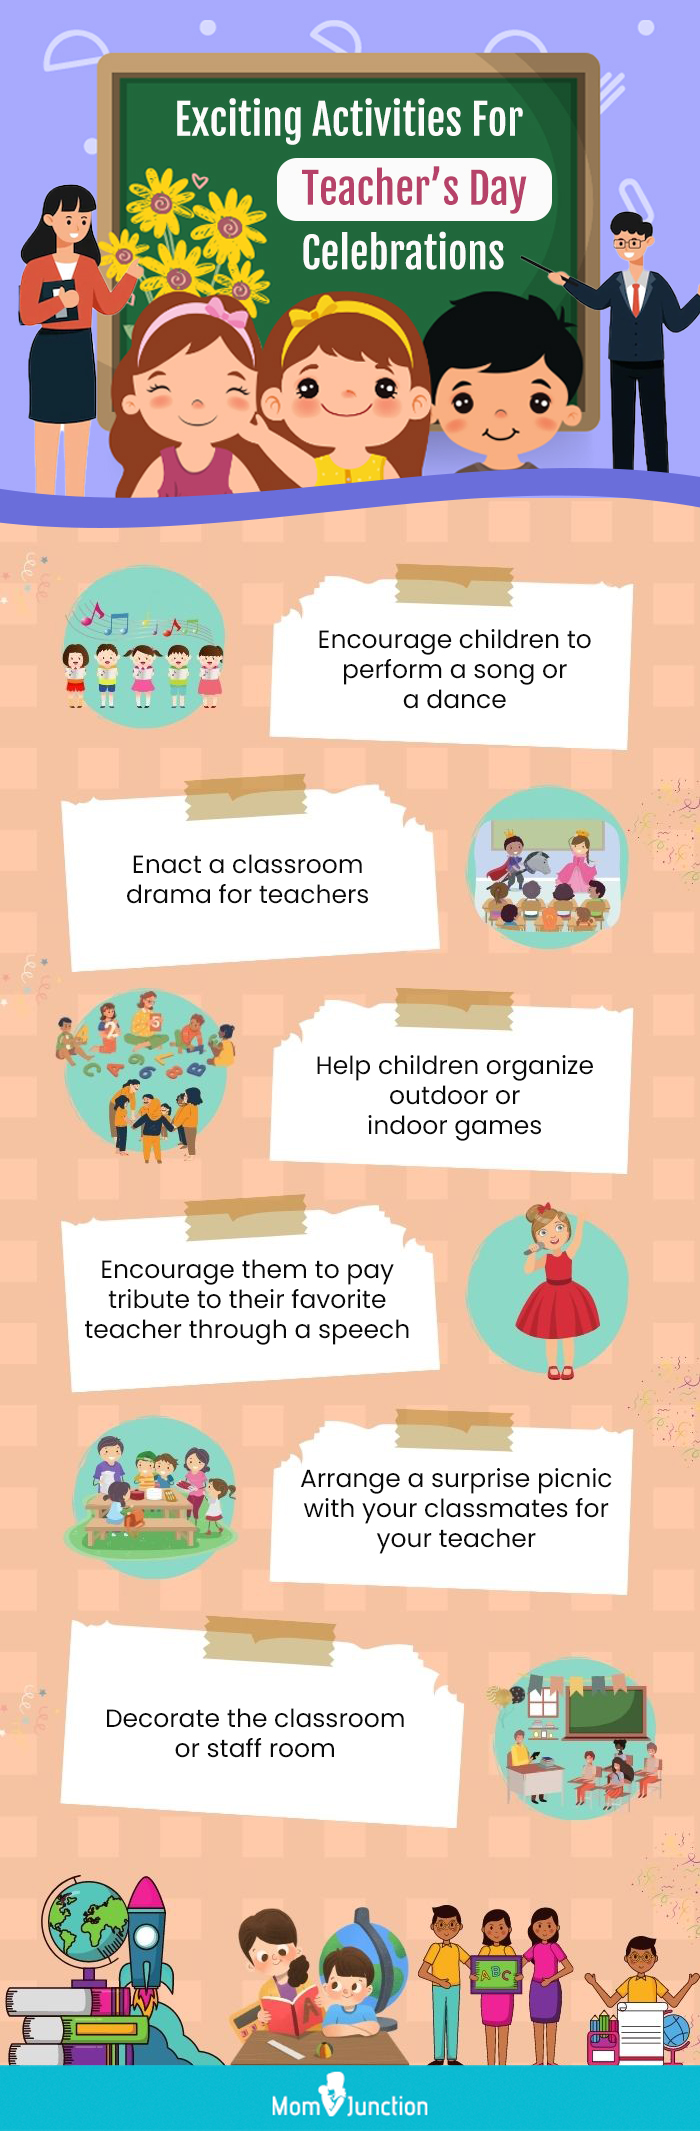 exciting activities for teacher’s day celebrations (infographic)